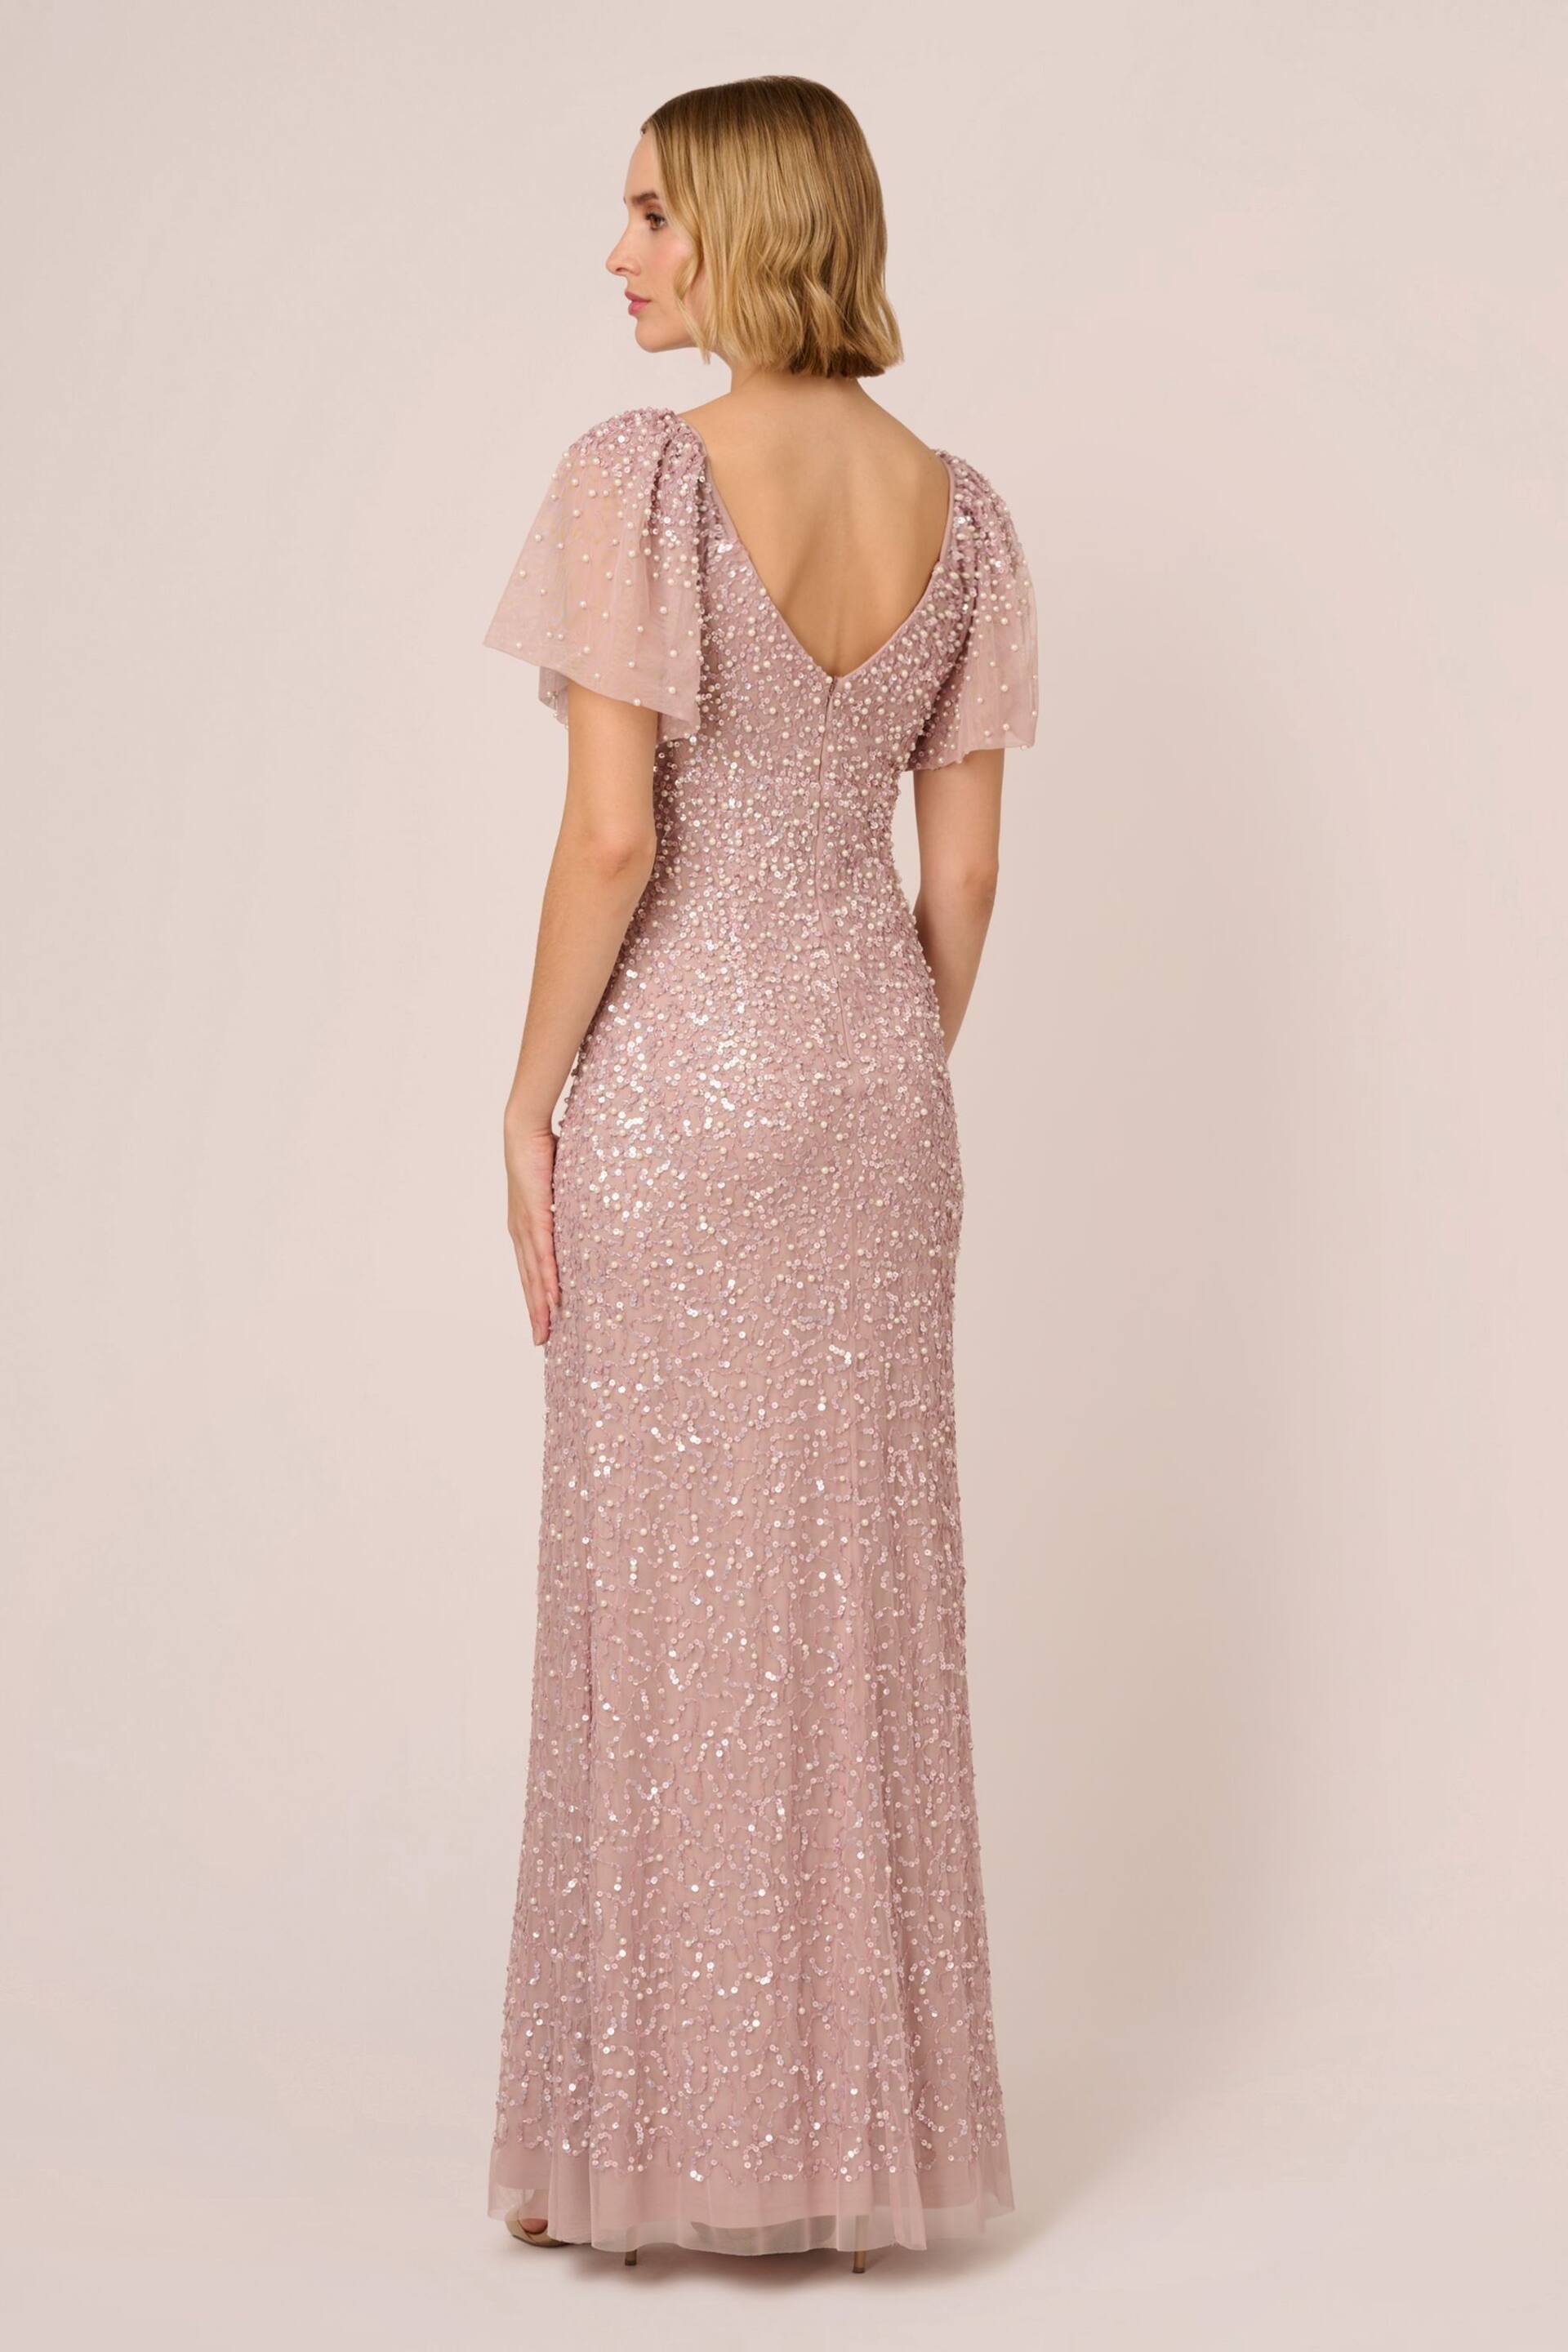 Adrianna Papell Pink V-Neck Beaded Mesh Long Dress - Image 2 of 7